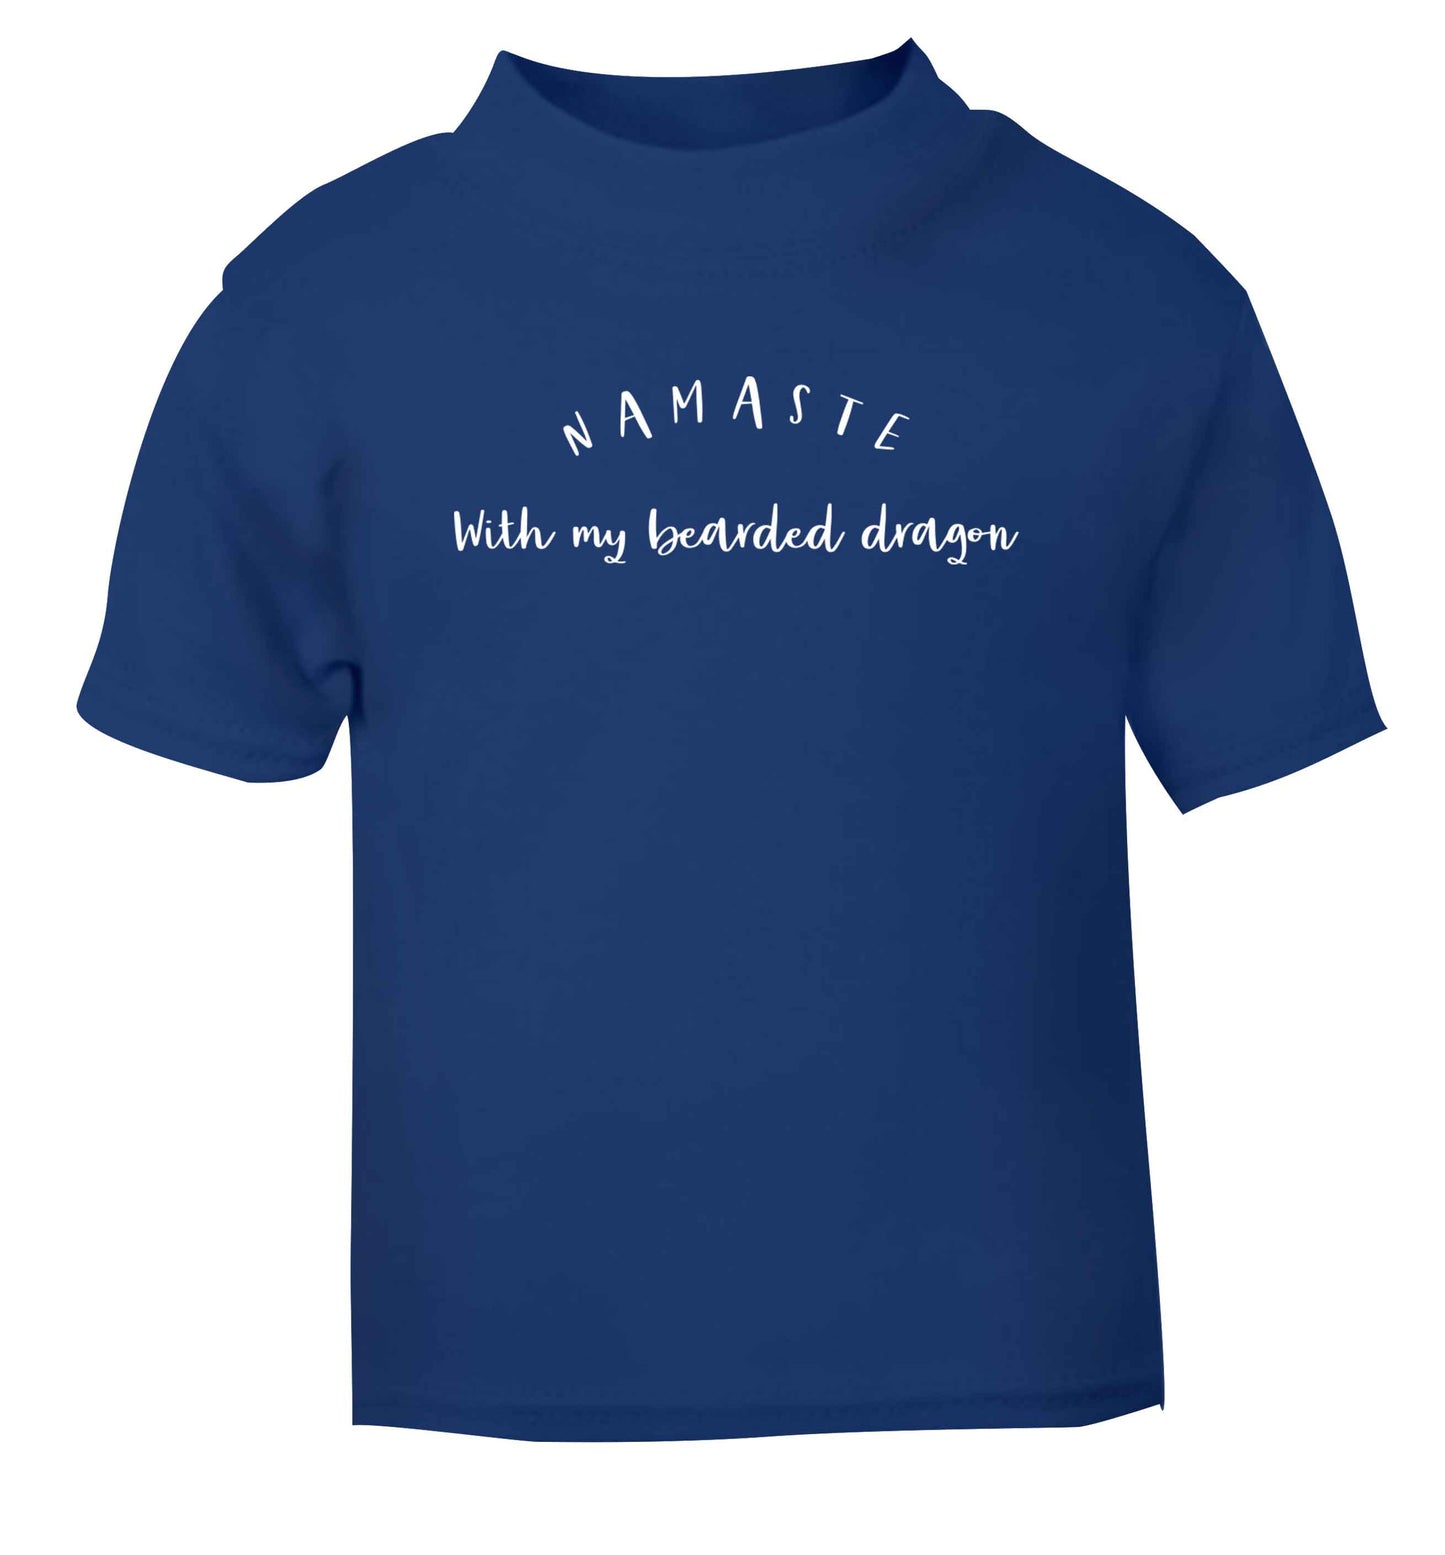 Namaste with my bearded dragon blue Baby Toddler Tshirt 2 Years